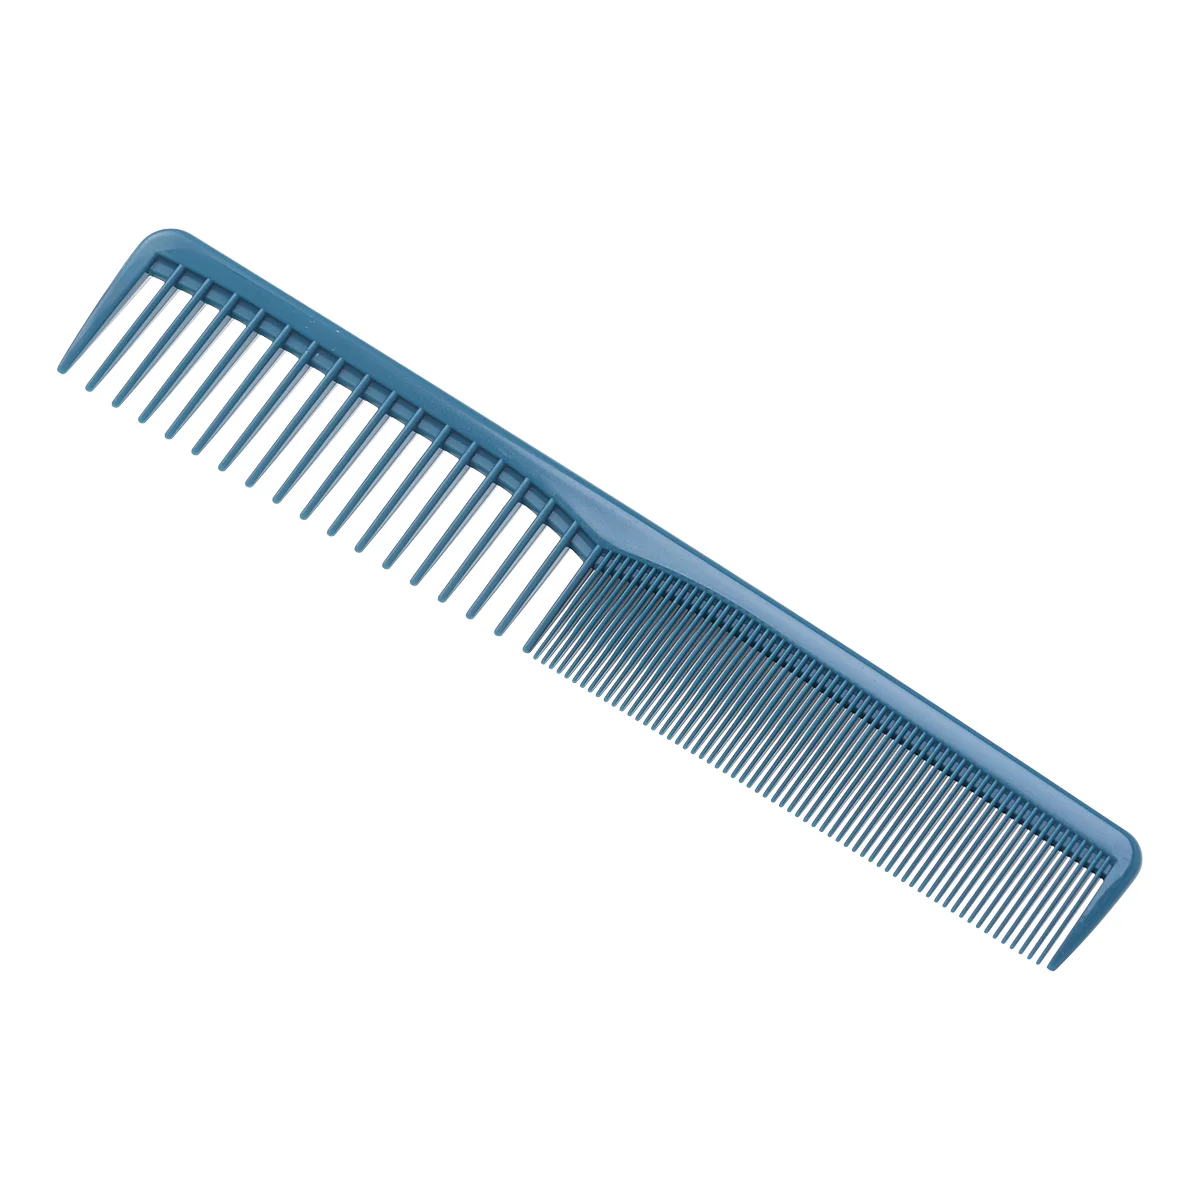 

Comb Hair Combs Barber Professional Cutting Haircut Salon Women Men Dressing Fine Hairdressing Curly Stylist Resistant Tooth